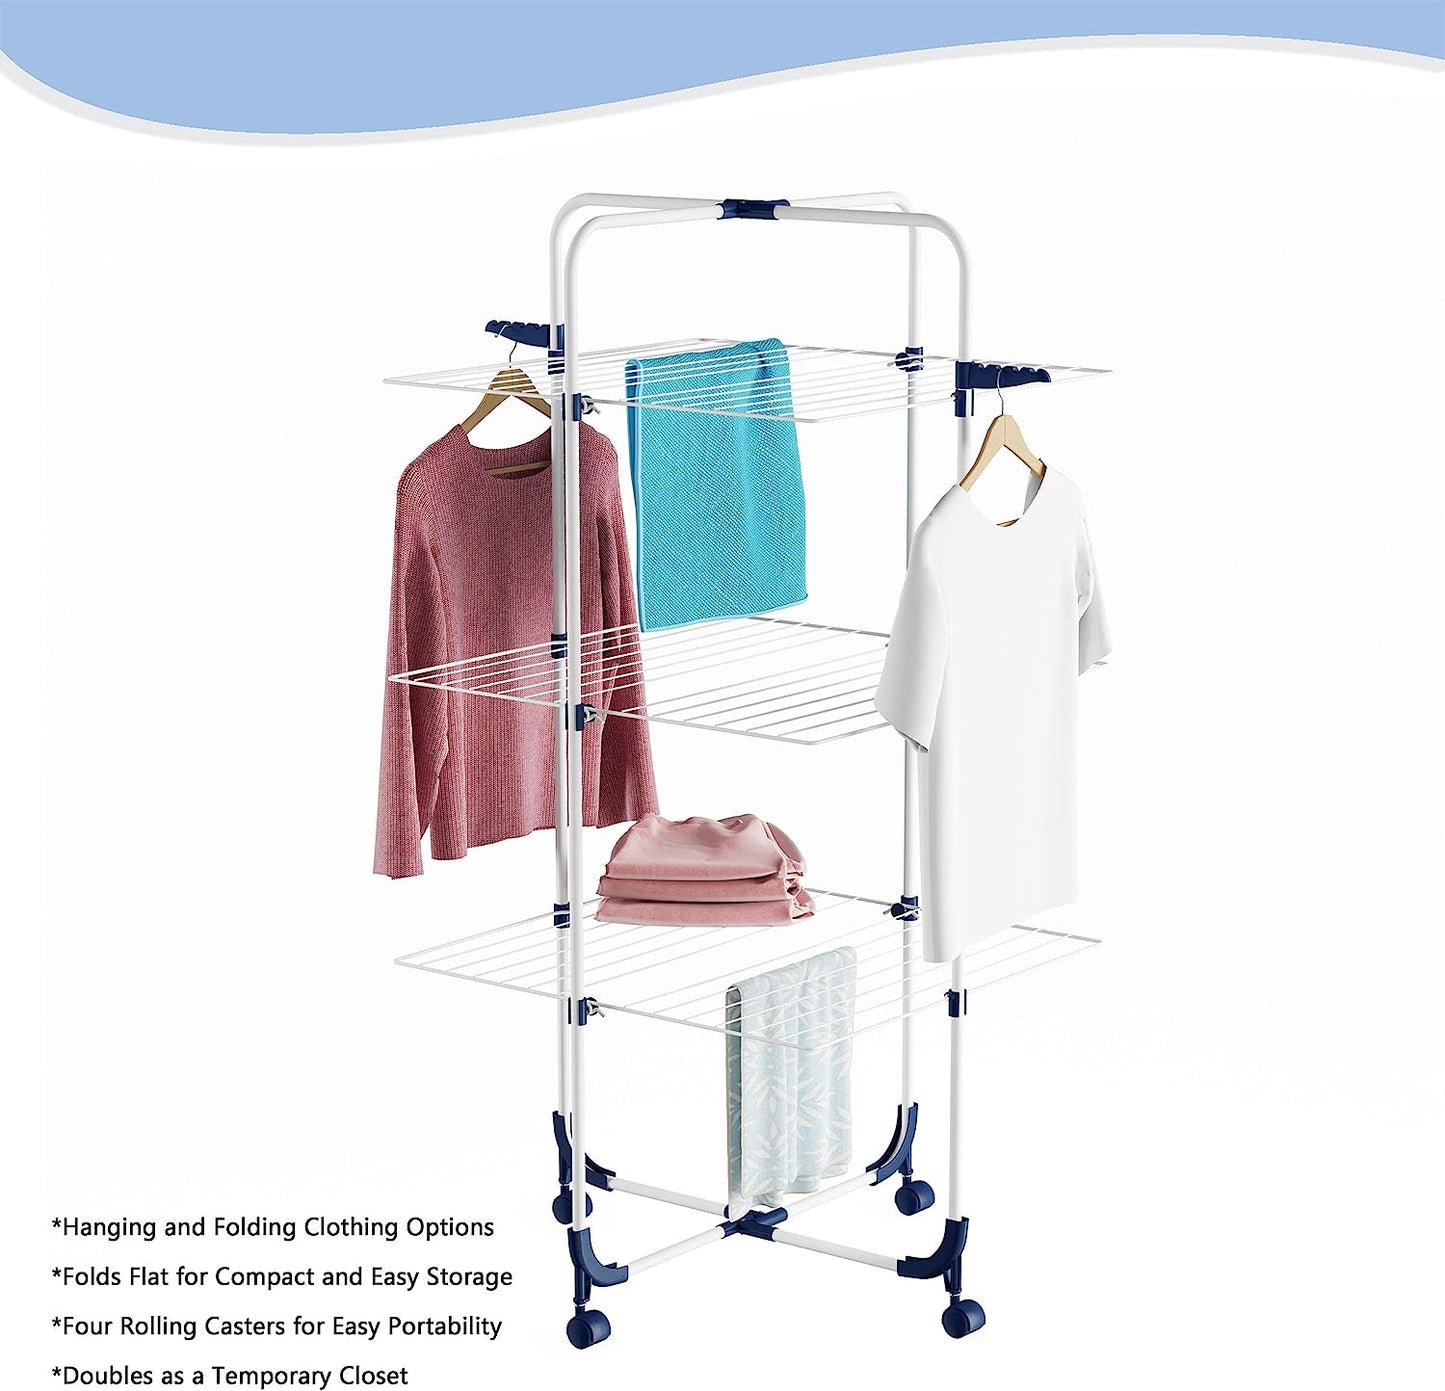 Home Clothes Rack – 3-Tiered Laundry Station with Collapsible Shelves and Wheels for Folding